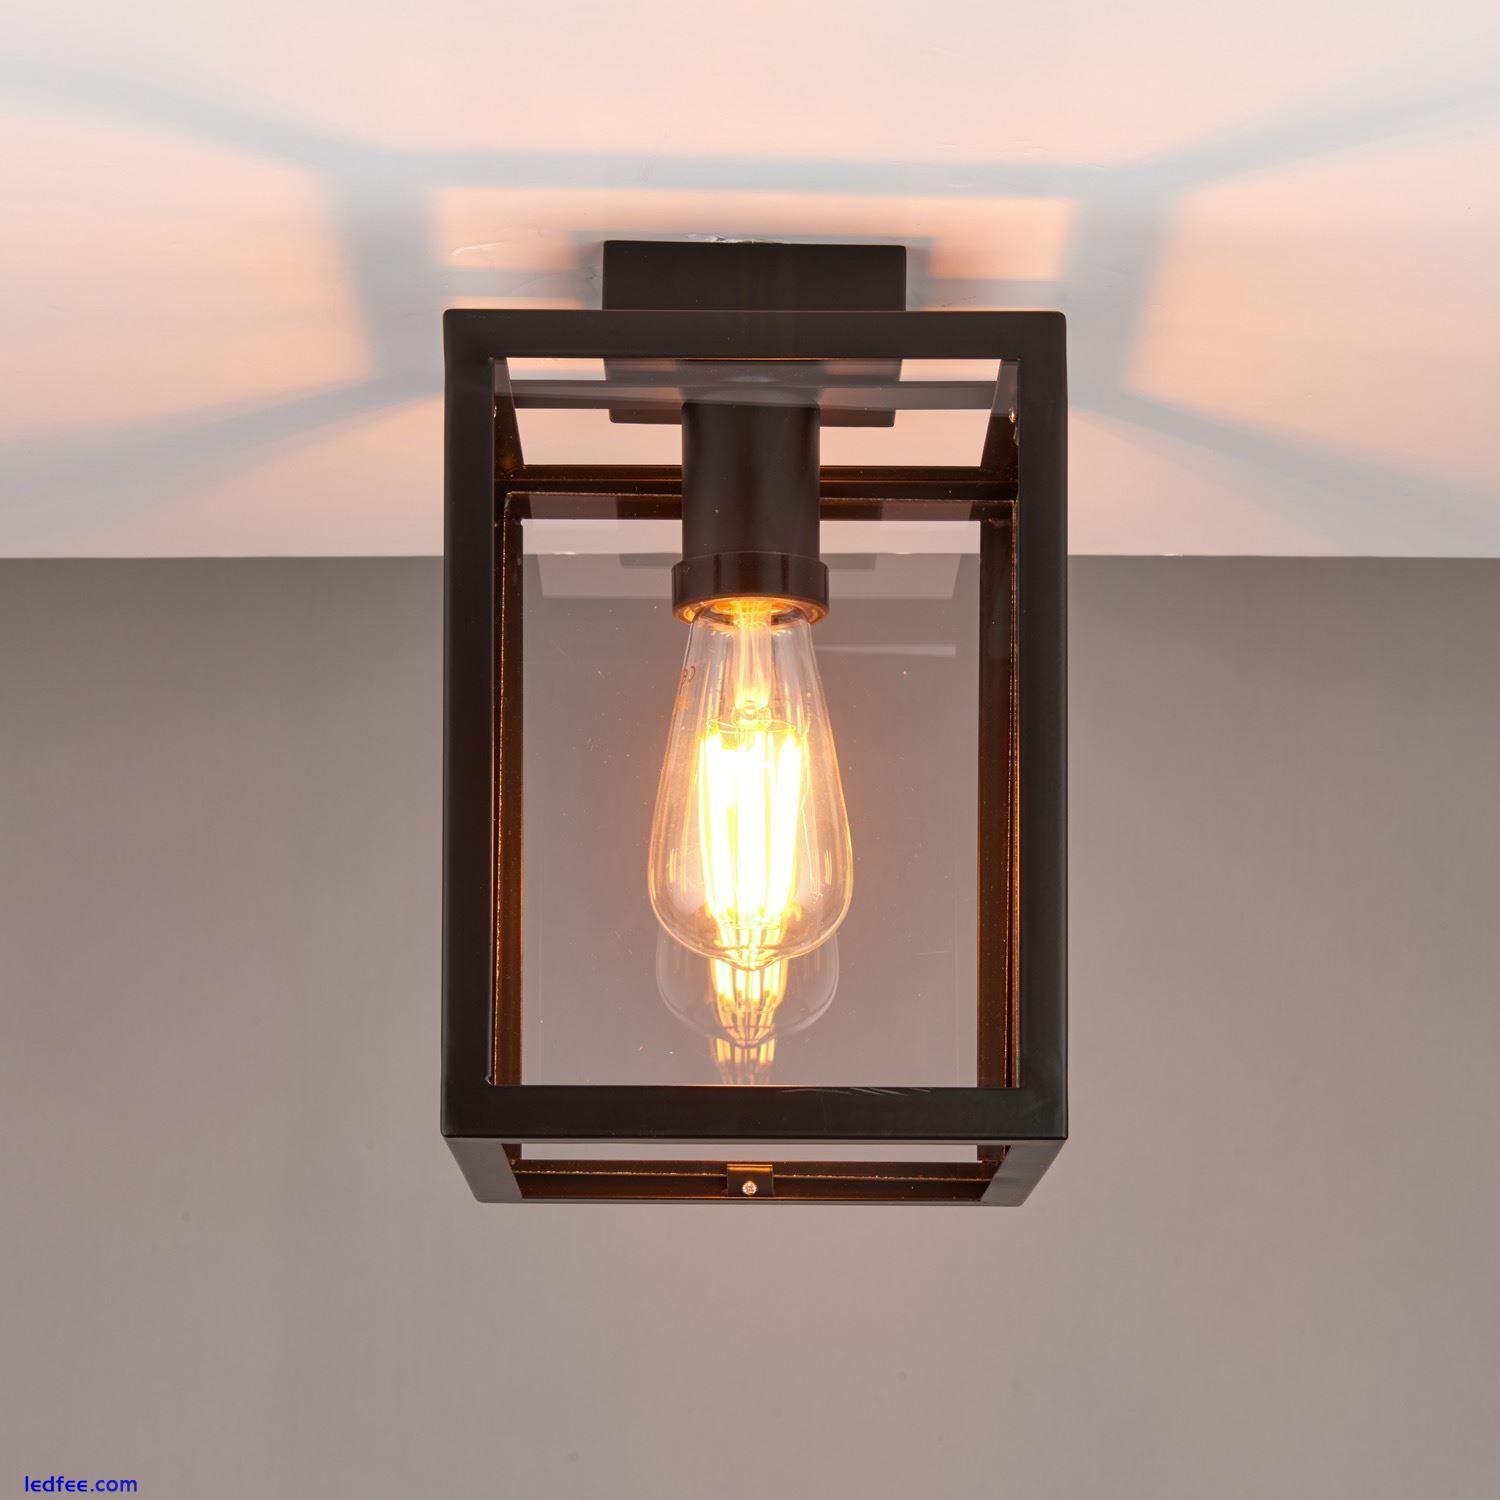 Modern Black Ceiling Flush Light Fitting IP44 Rated Bathroom Outdoor Porch 0 